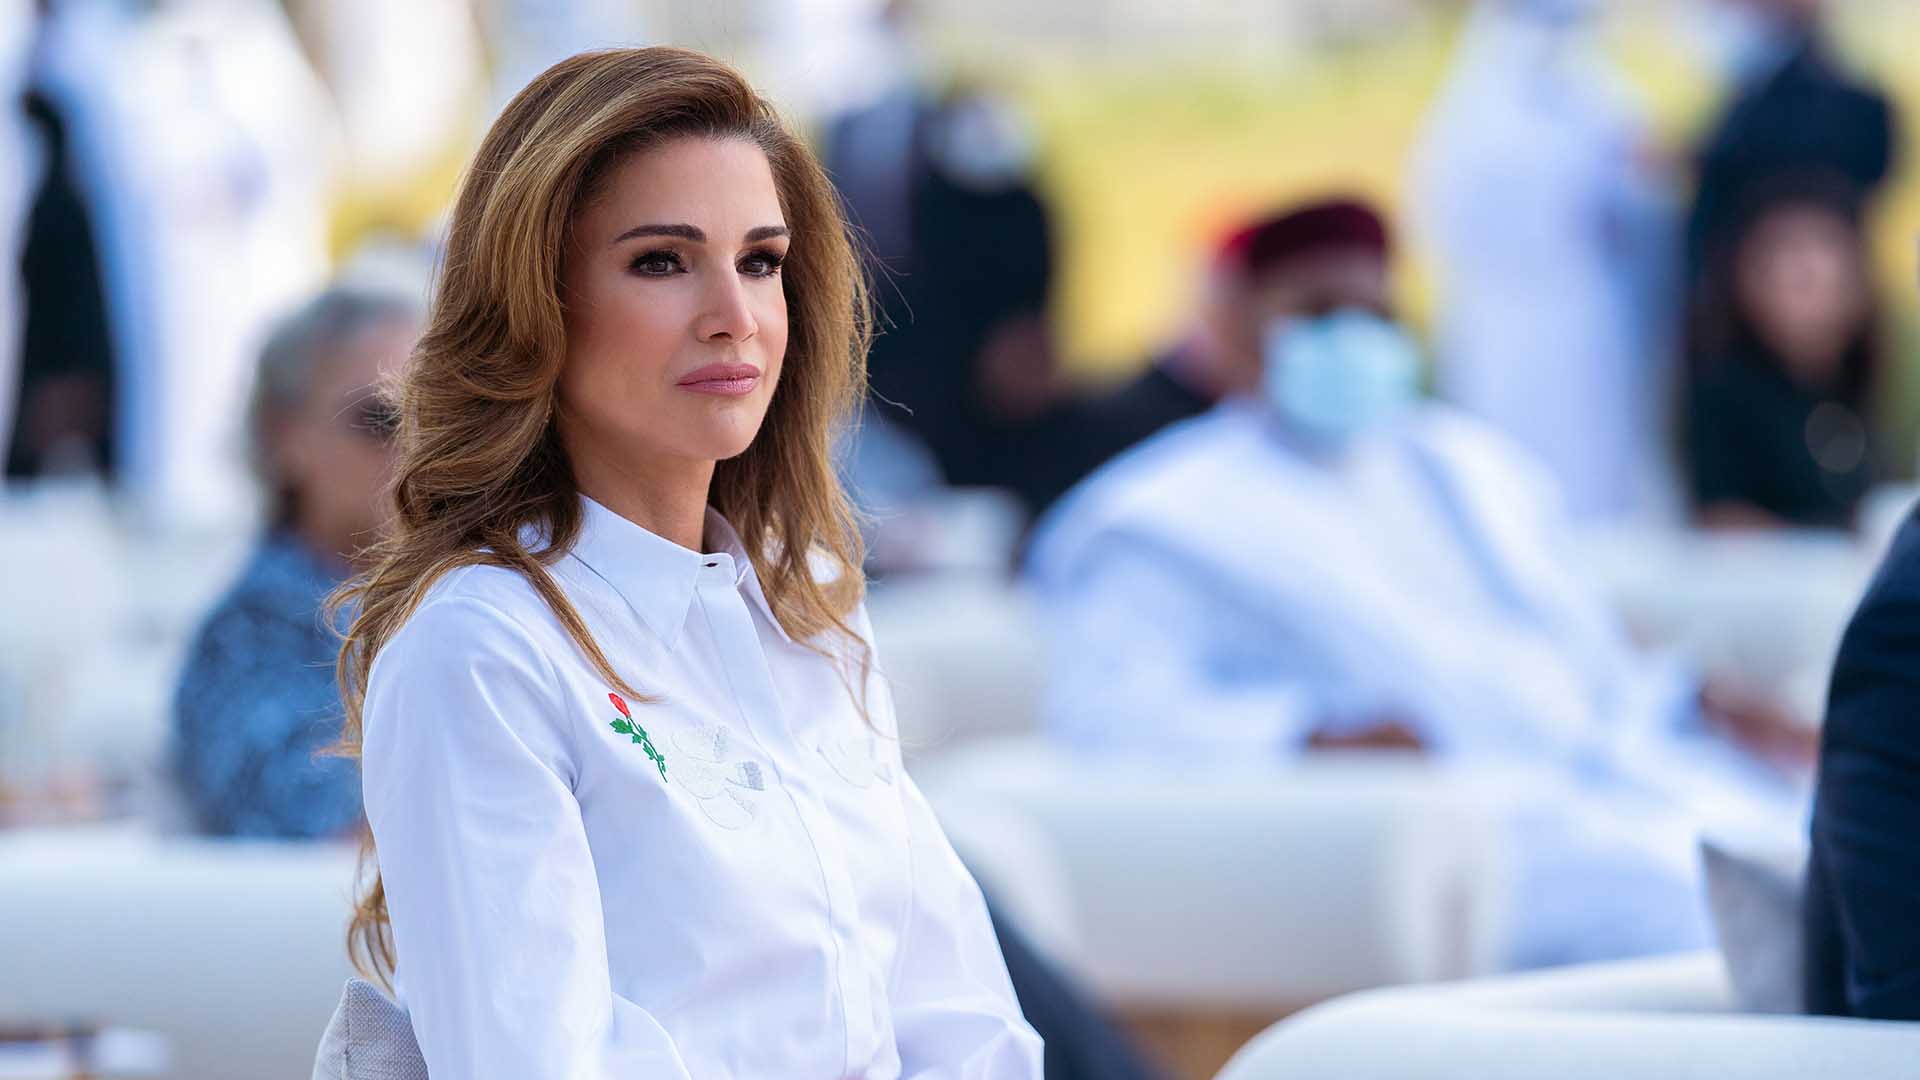 King Abdullah II and Queen Rania of Jordan in Abu Dhabi, on February 26, 2022, to receive receive the 2022 Zayed Award for Human Fraternity